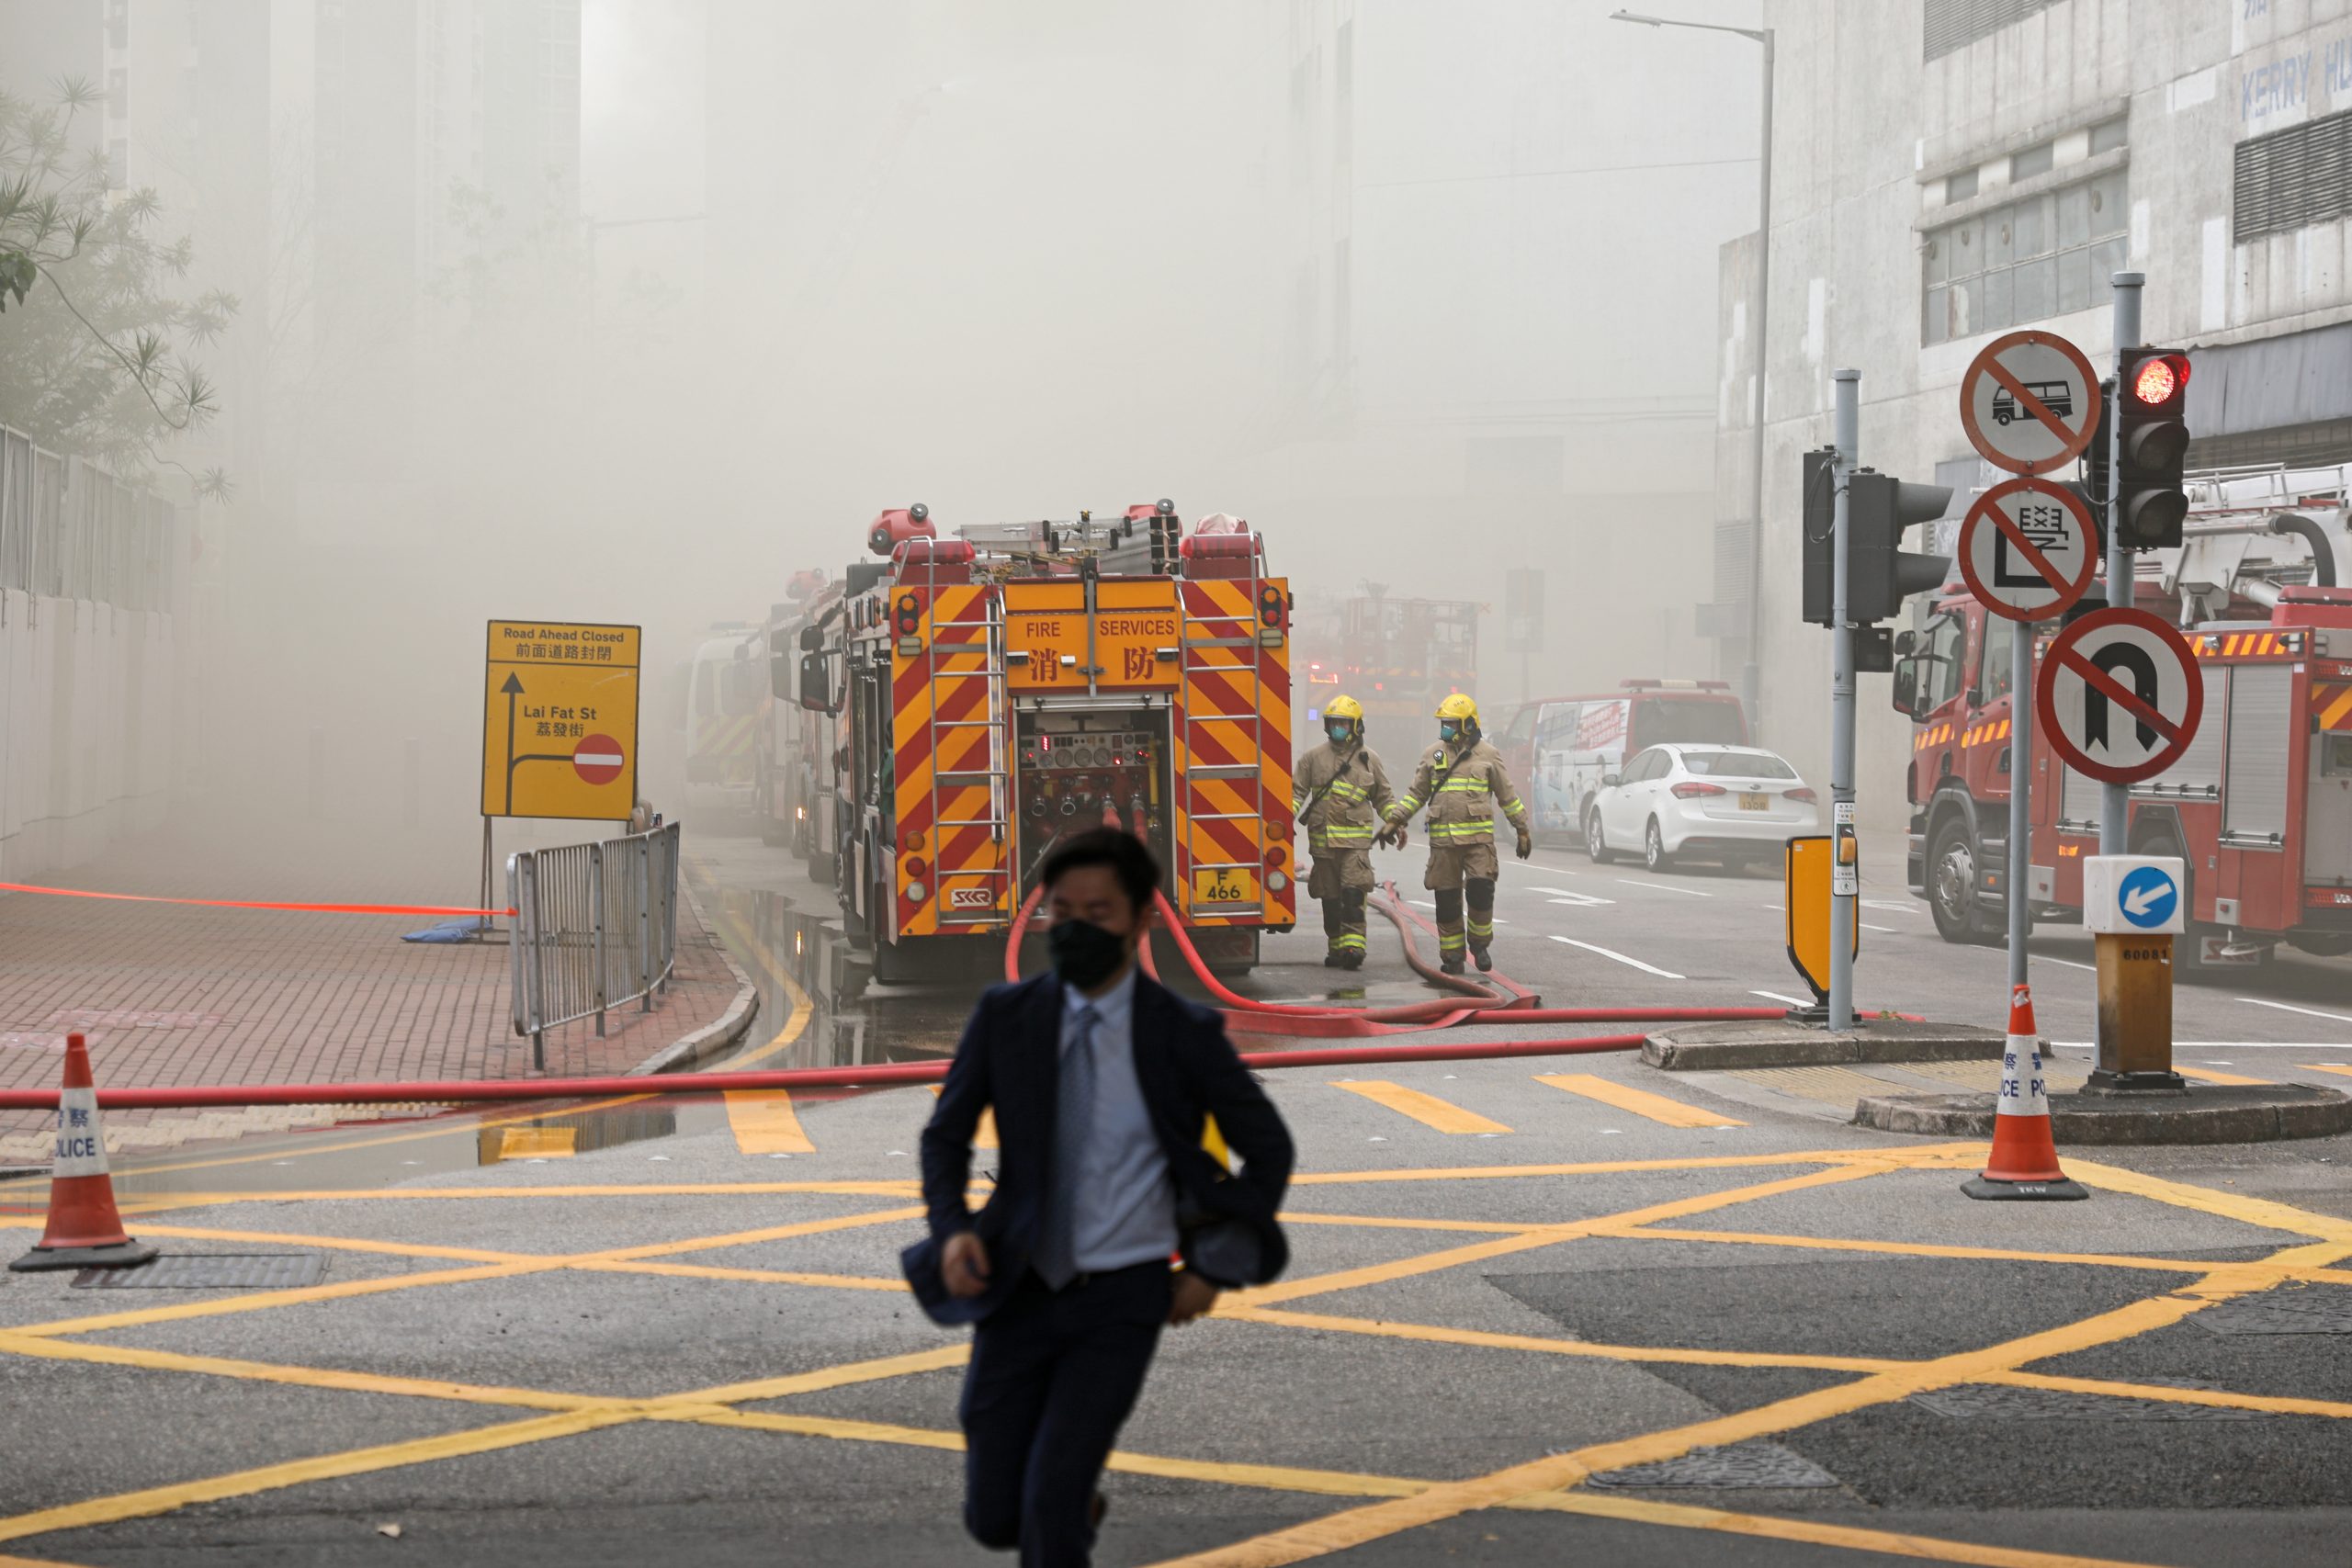 epa10539975 A man runs past fire engines as firefighters try to put out a fire that broke out at a warehouse in Hong Kong, China, 24 March 2023. A fire broke out on the second floor of the Yuen Fat Wharf and Godown building, injuring two fire workers and prompting the evacuation of nearby schools, the Fire Services Department reported.  EPA/JEROME FAVRE